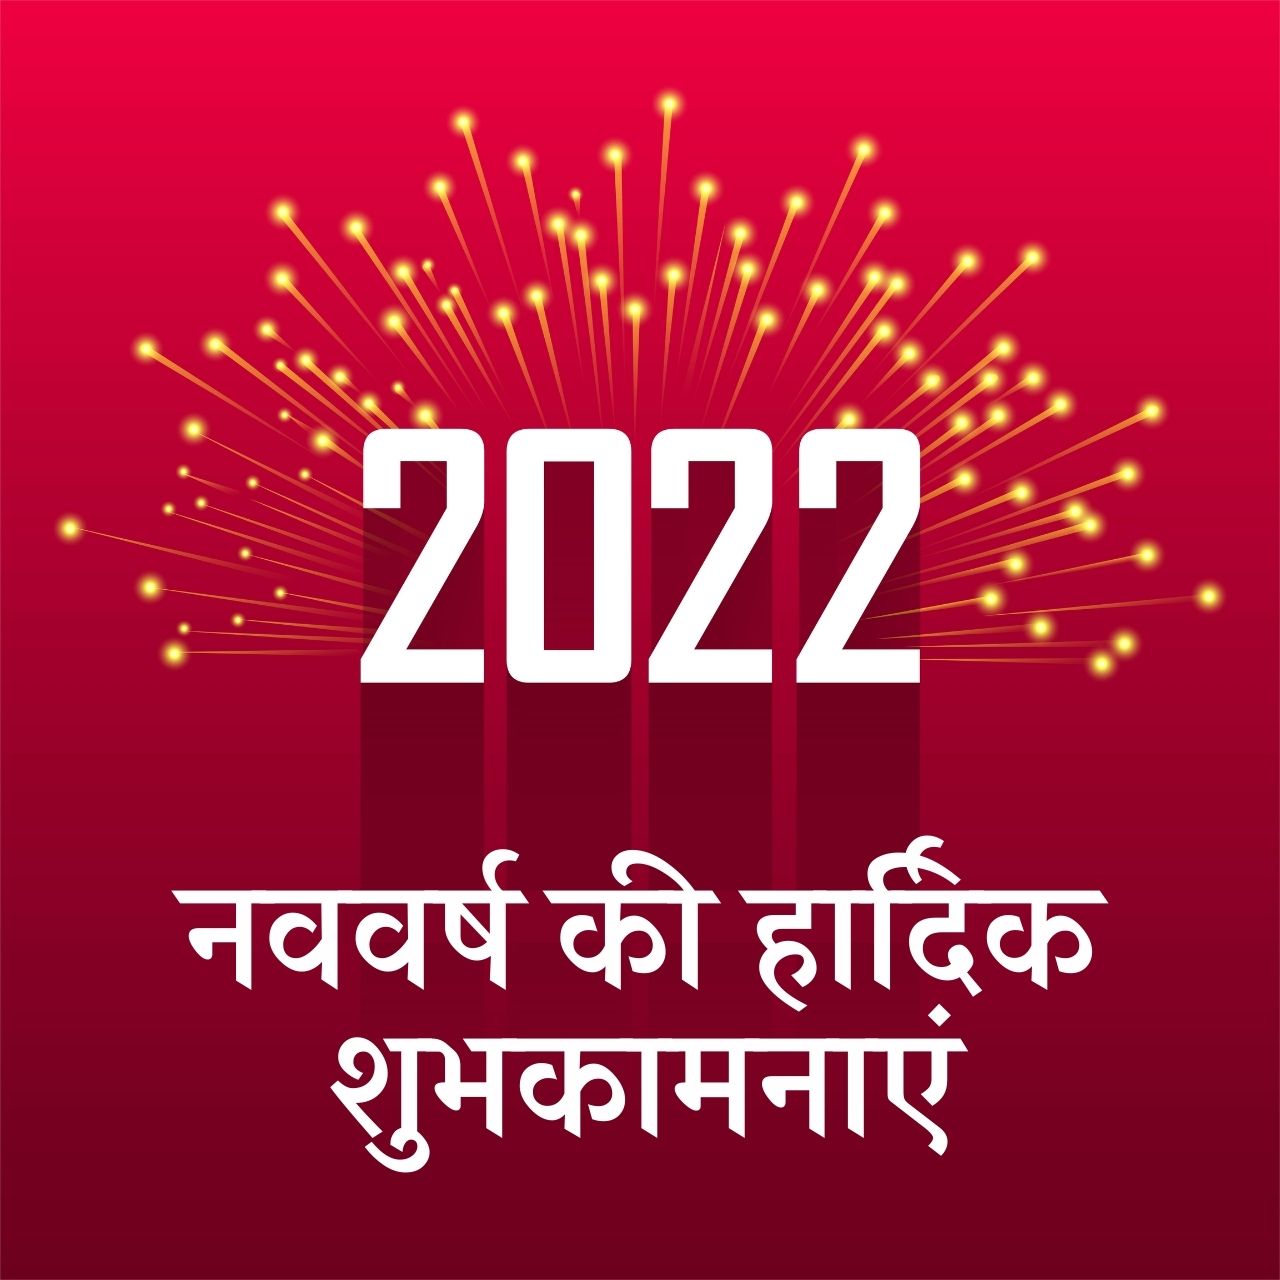 Happy New Year 2022 Hindi Shayari, Wishes, Quotes, HD Images, Greetings, Messages, and Status to share